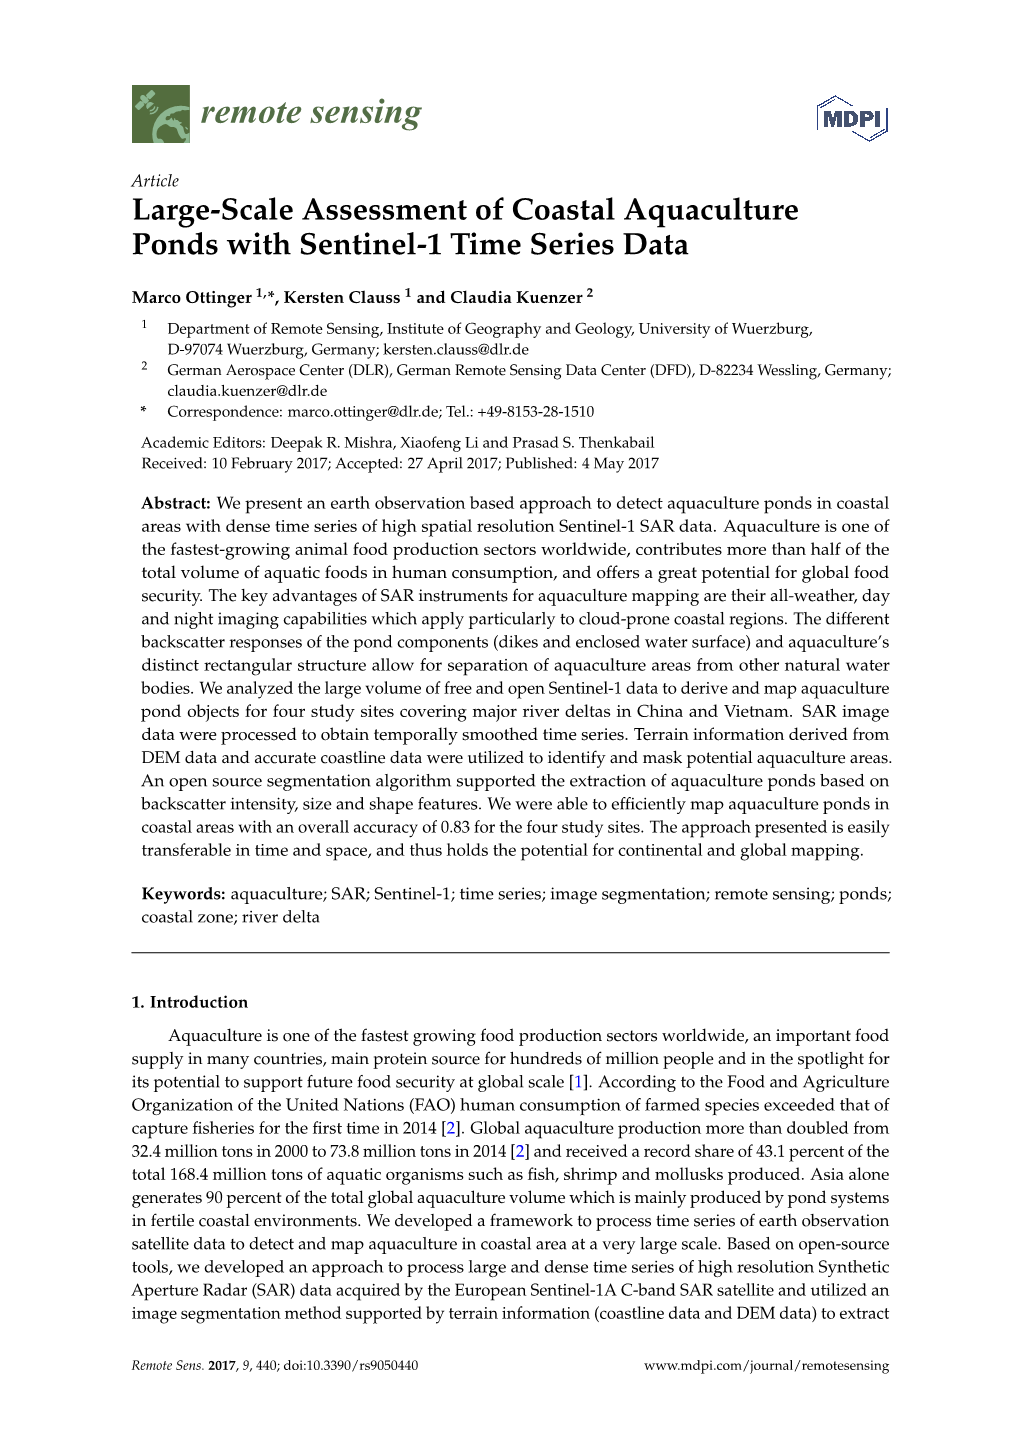 Large-Scale Assessment of Coastal Aquaculture Ponds with Sentinel-1 Time Series Data